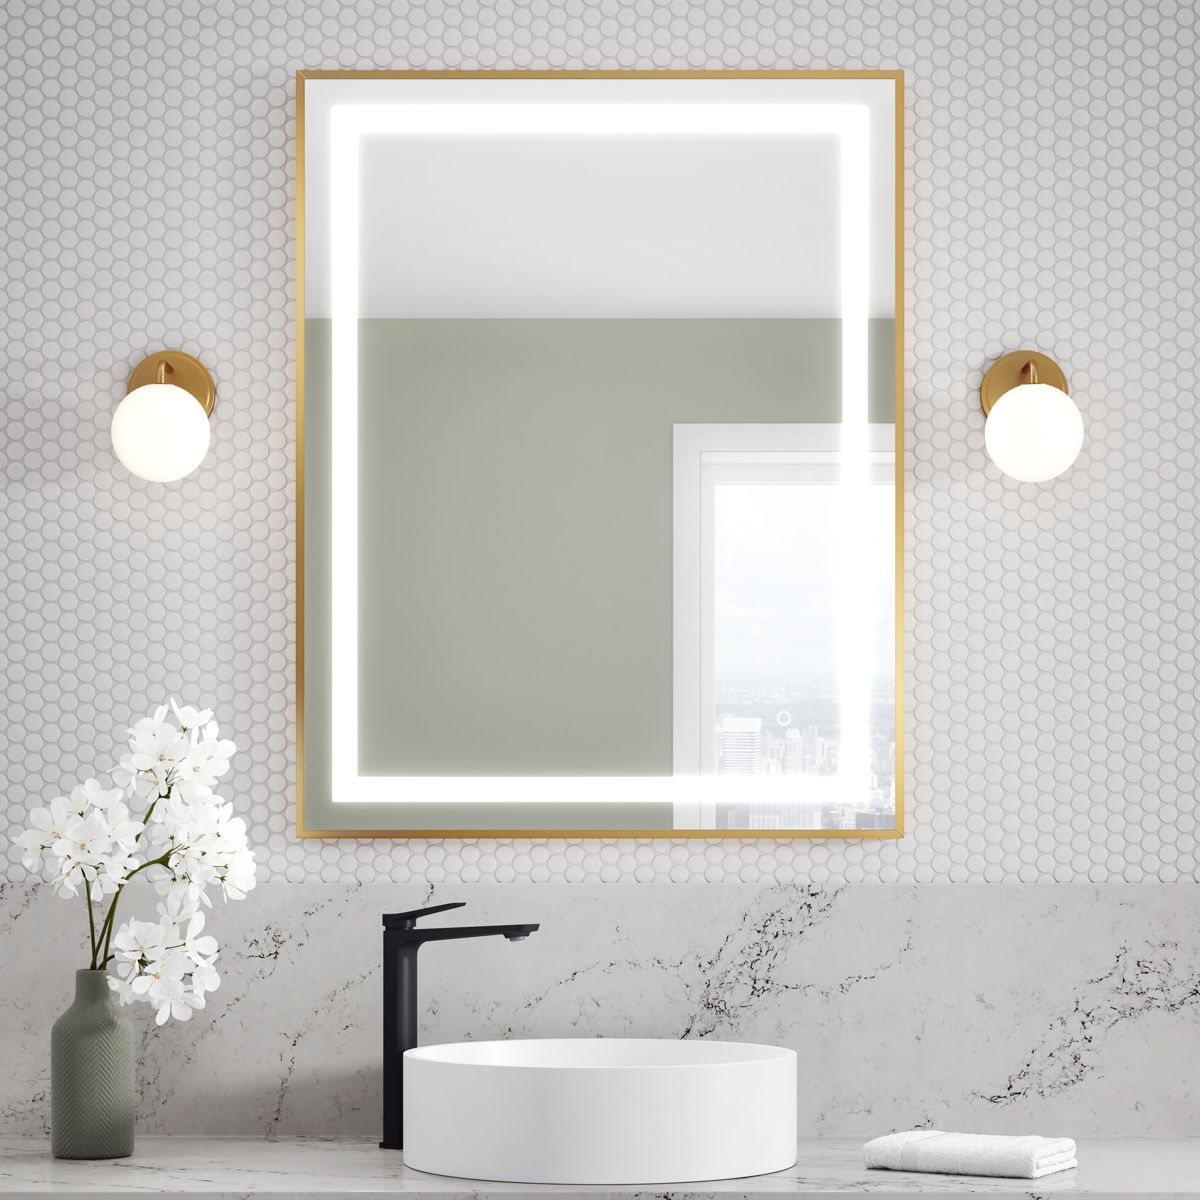 Kalia - Effect LED Illuminated Rectangular Mirror With Frosted Strip, Brushed Gold Frame and Touch-switch for Color Temperature Control 30" X 38" X 1⅝"